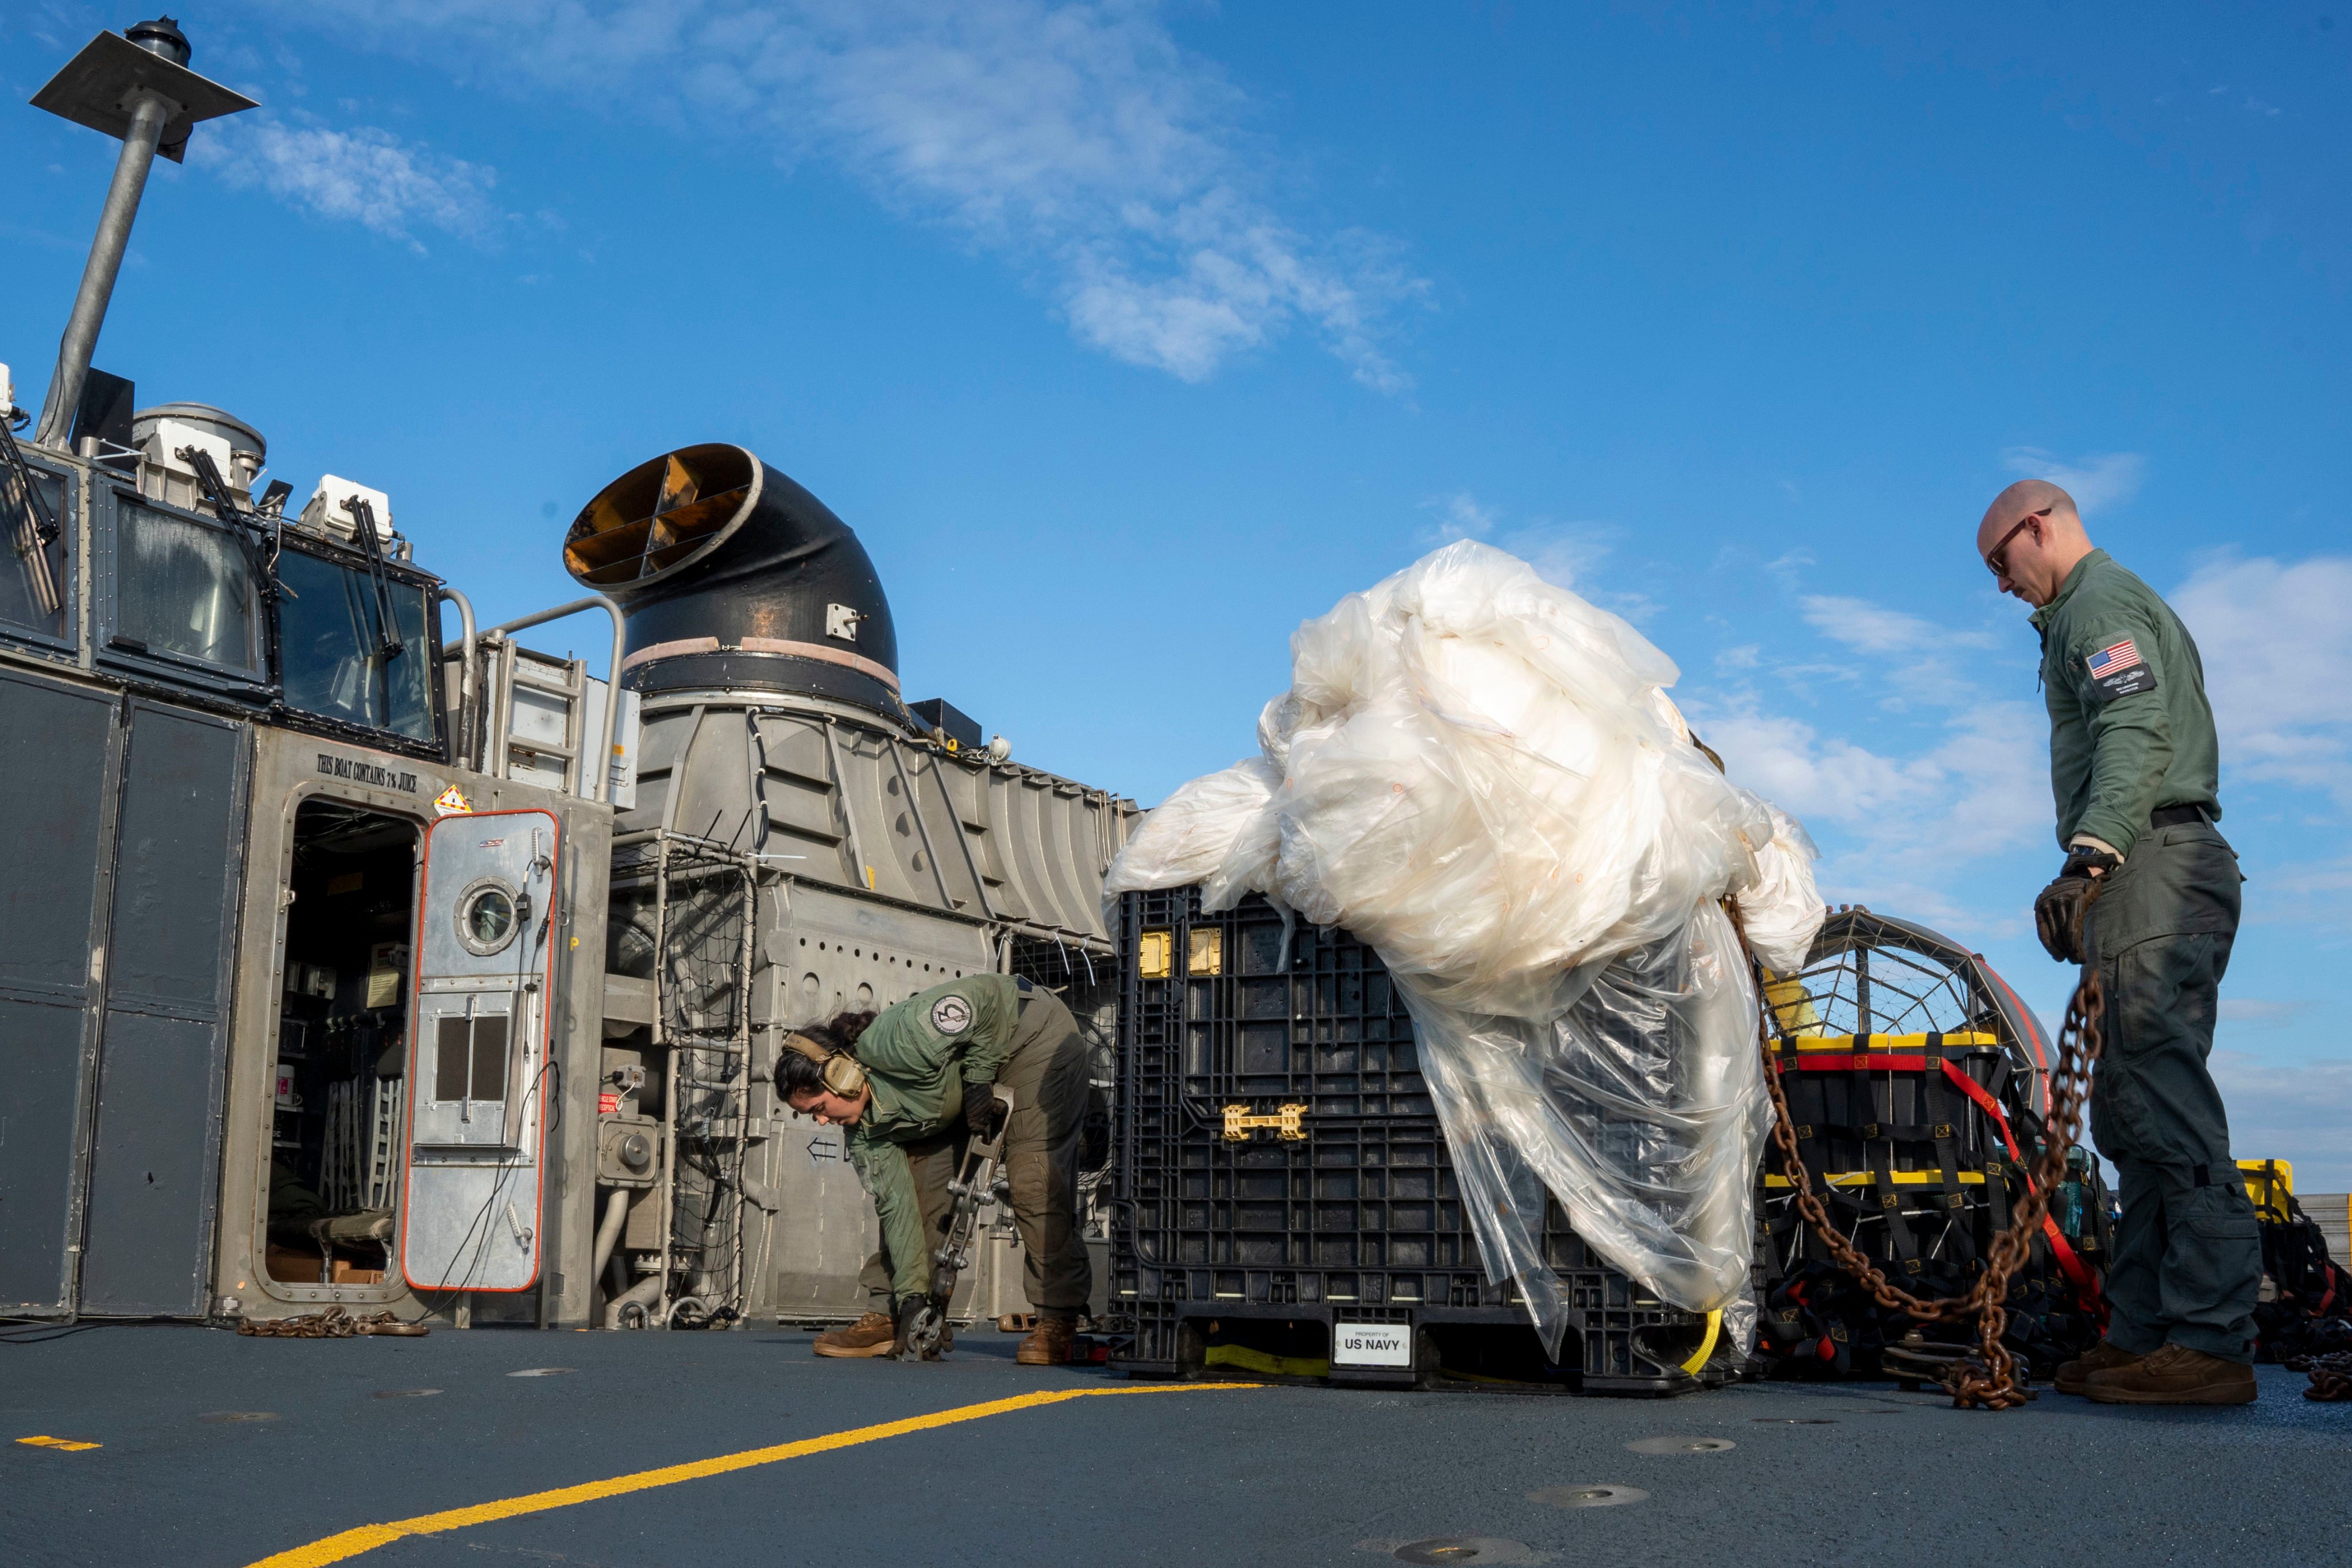 US Navy sailors examine material recovered from the shooting down of a Chinese high-altitude balloon off the East Coast of the US, on February 10. Photo: US Navy via AP